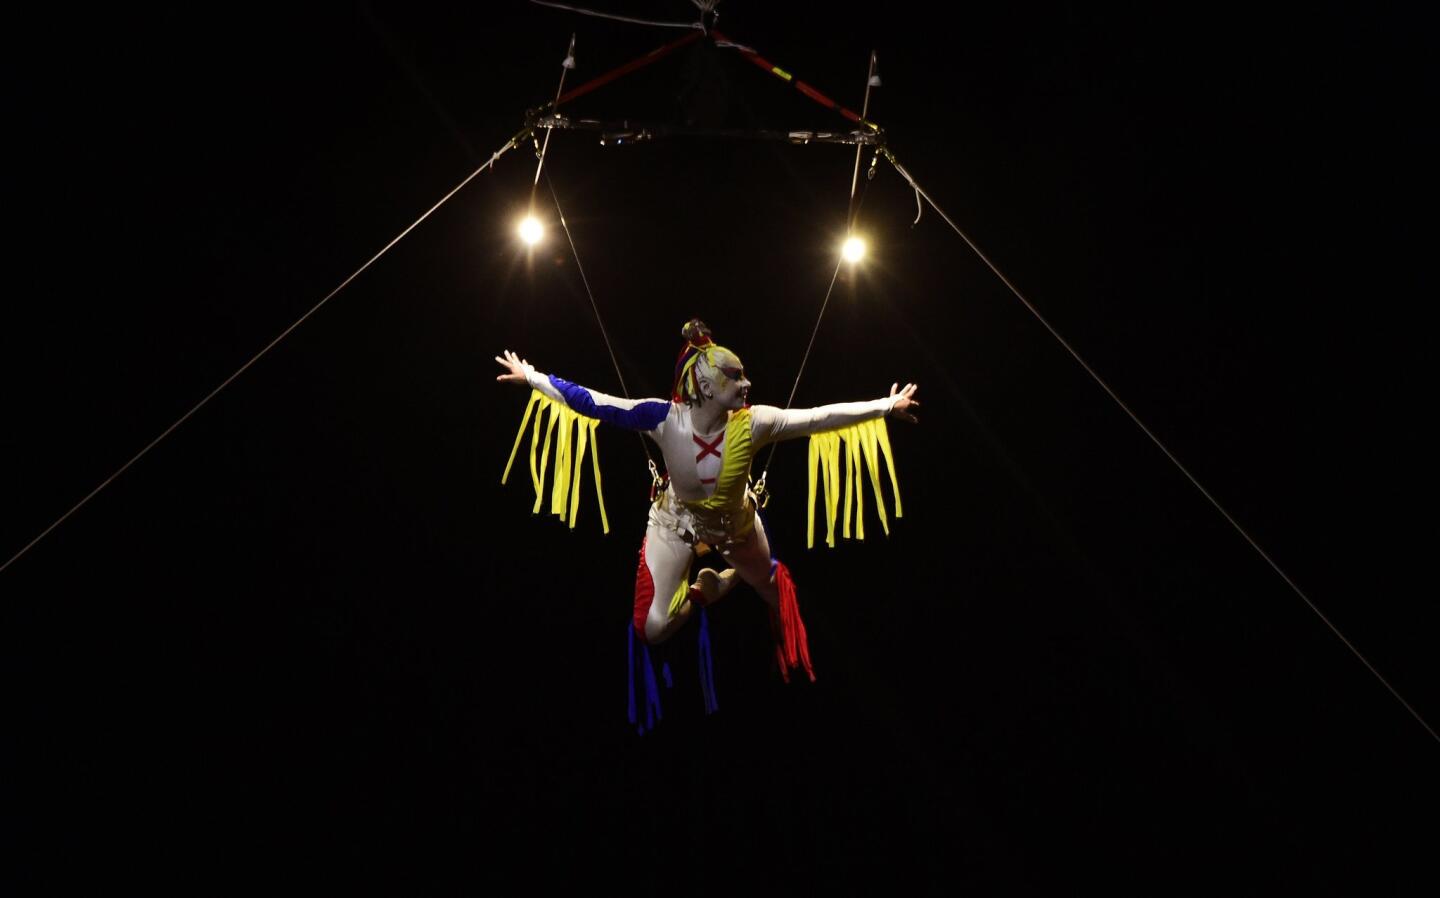 An artist performs during the Copa America inauguration ceremony at the Nacional stadium in Santiago, on June 11, 2015. Chile will face Ecuador in the inauguration match. AFP PHOTO / LUIS ACOSTALUIS ACOSTA/AFP/Getty Images ** OUTS - ELSENT, FPG - OUTS * NM, PH, VA if sourced by CT, LA or MoD **